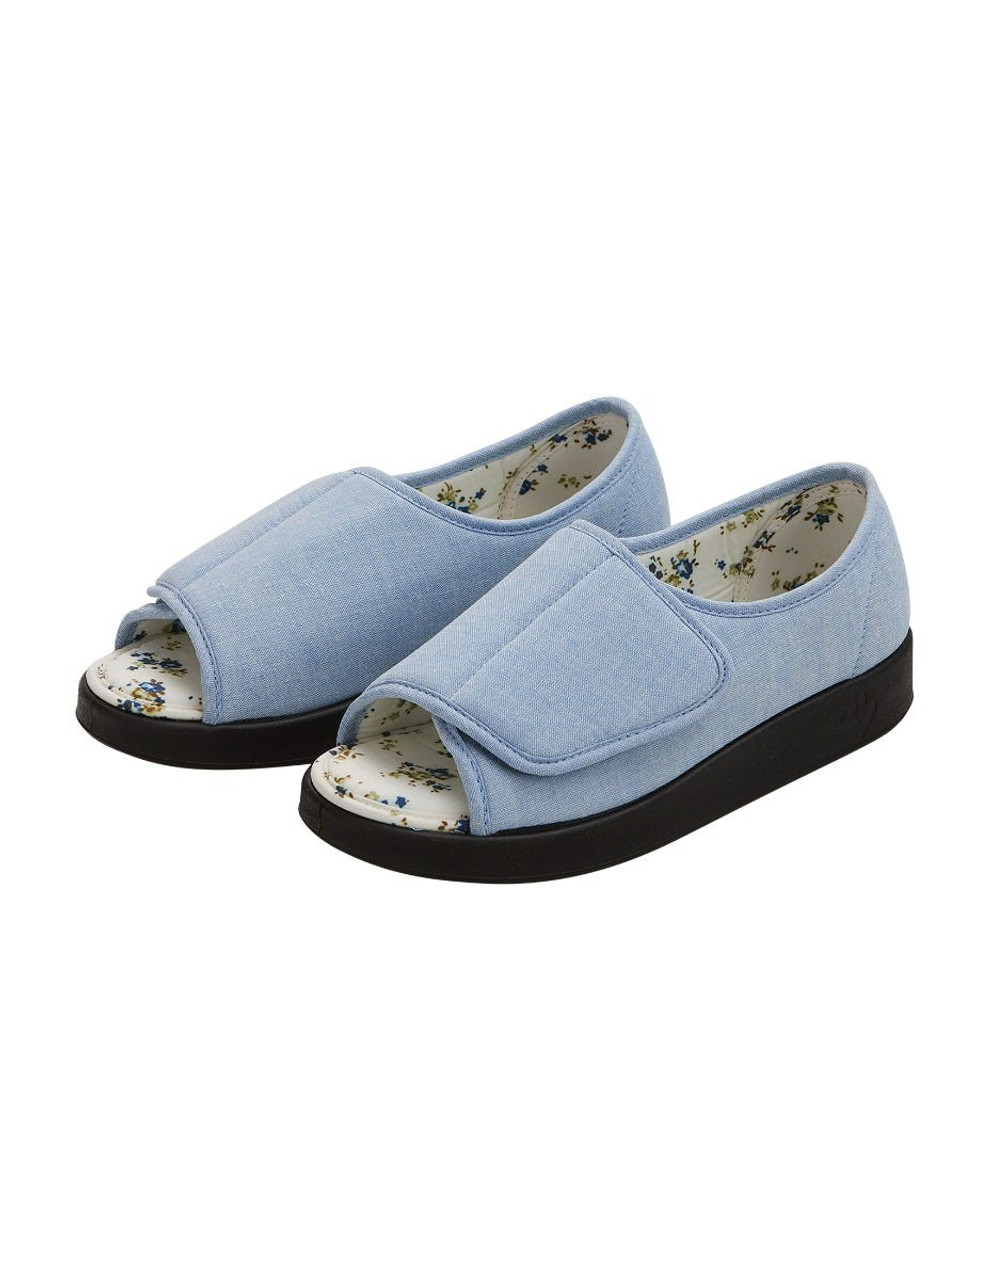 Silverts SV15180 Womens Extra Wide Open Toed Shoes for Indoor & Outdoor  Denim, Size=11, SV15180-SVDEB-11